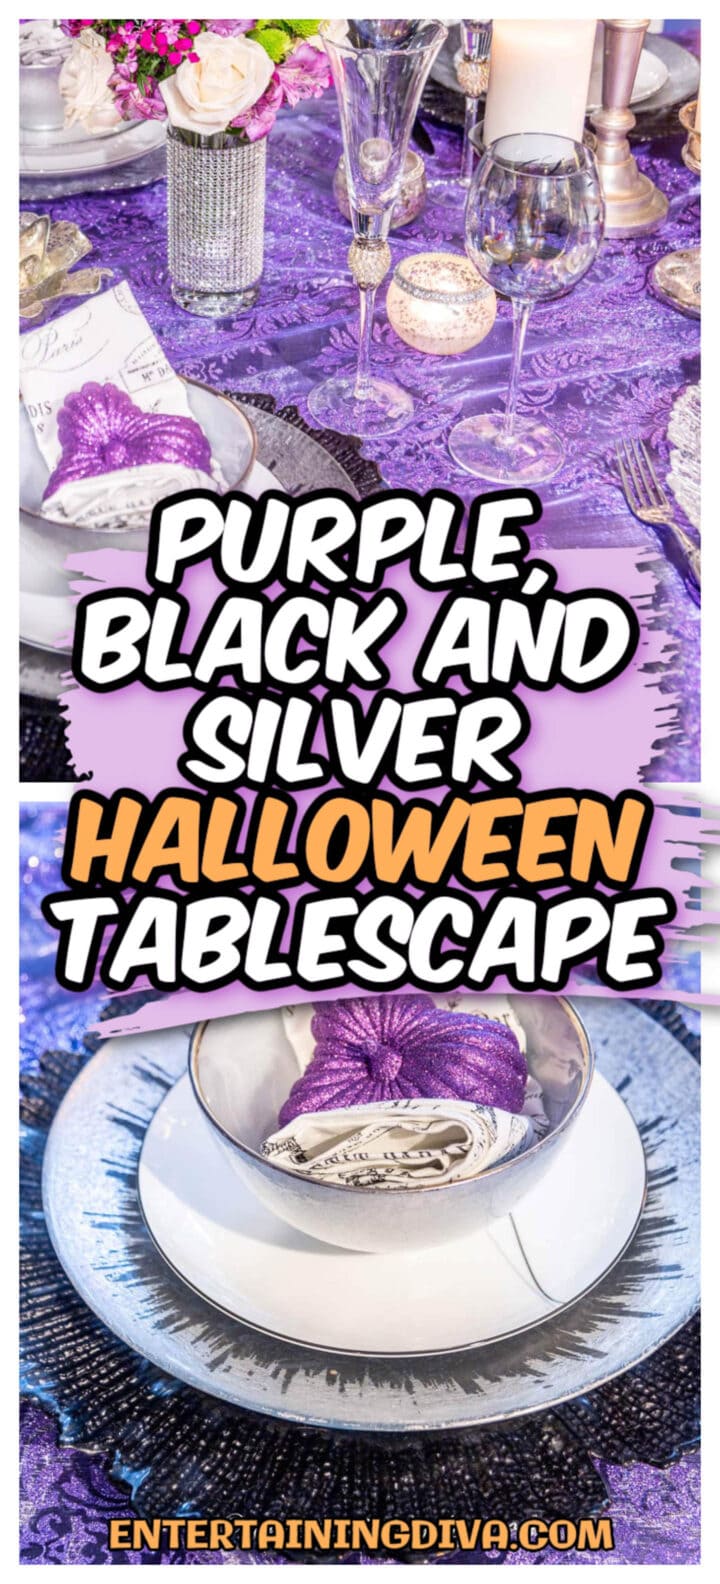 Purple and silver Halloween tablescape.